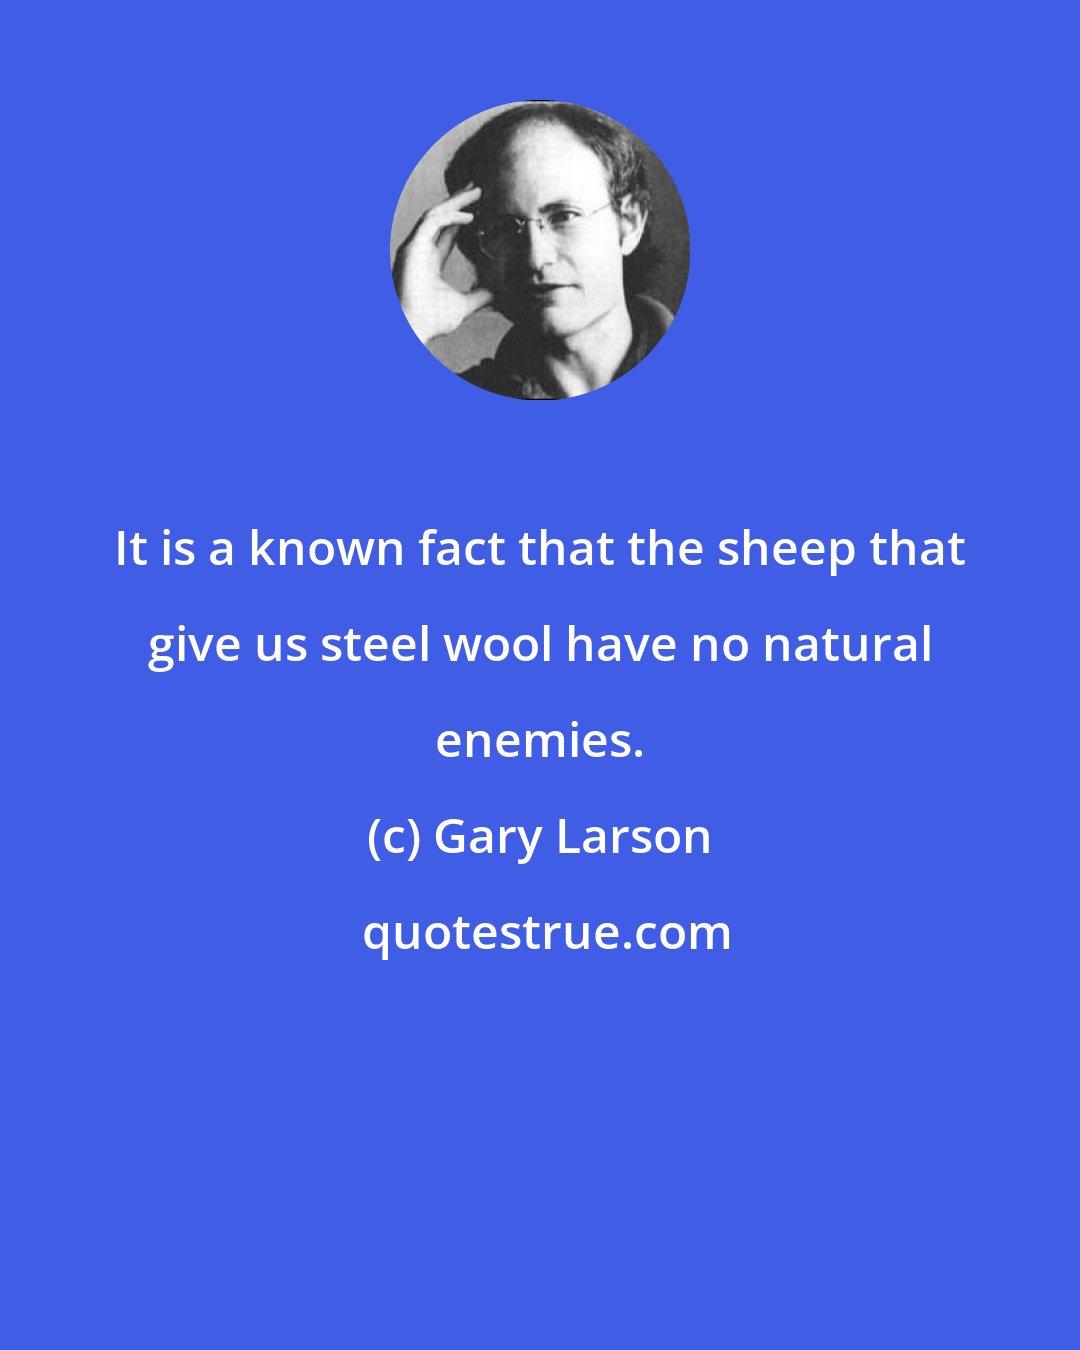 Gary Larson: It is a known fact that the sheep that give us steel wool have no natural enemies.